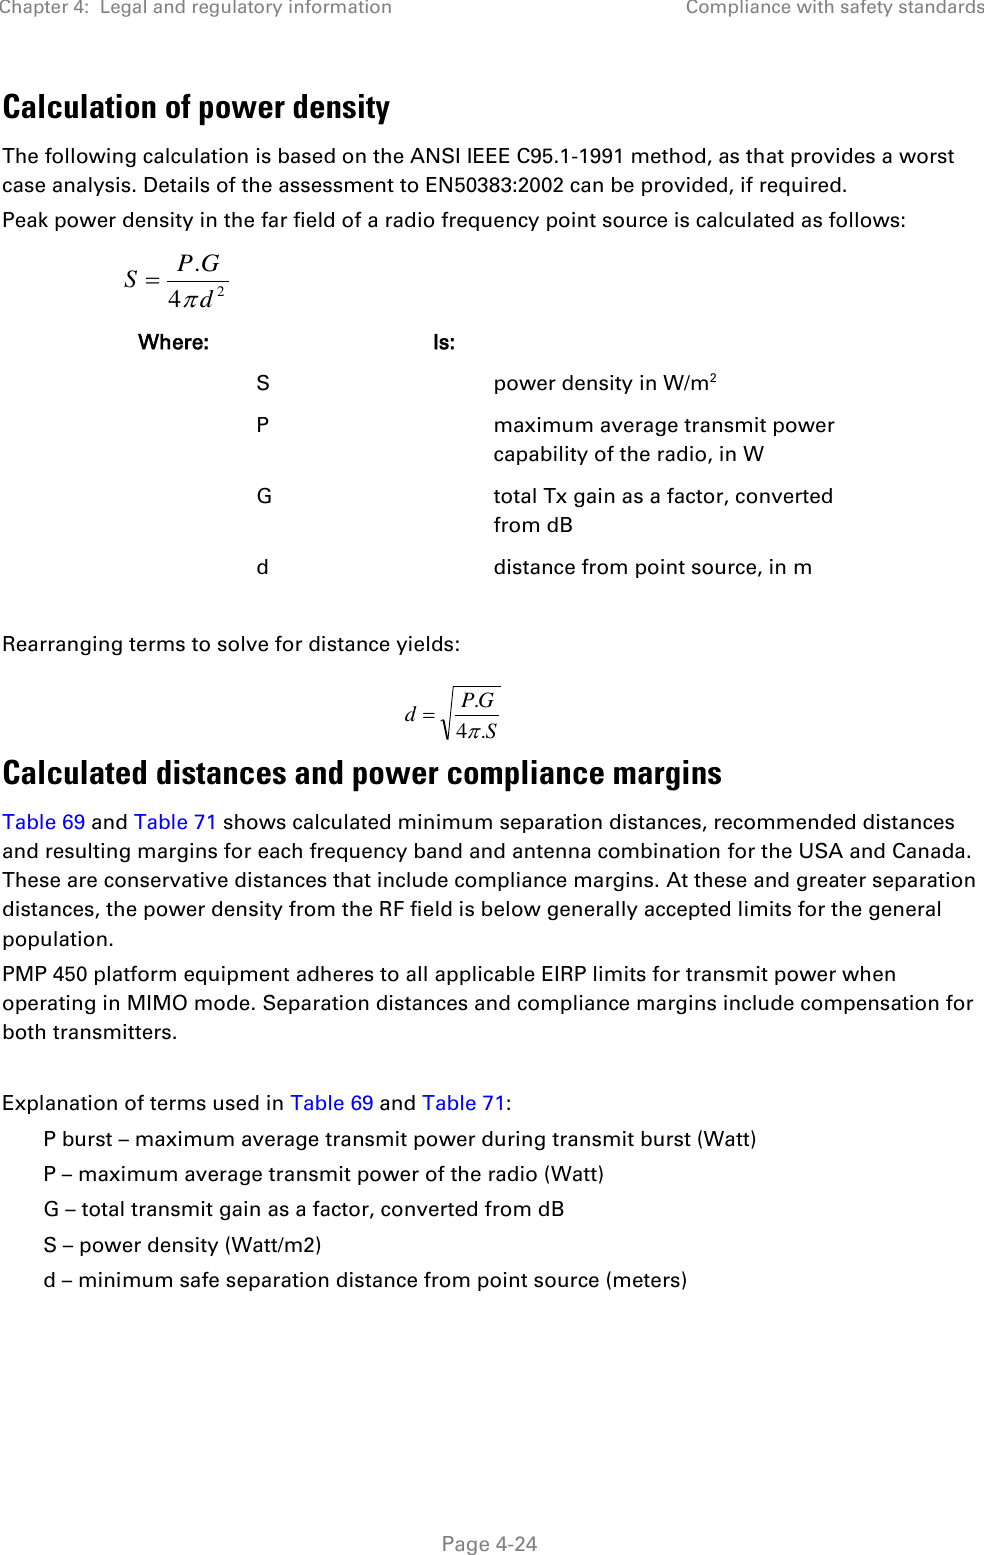 Chapter 4:  Legal and regulatory information Compliance with safety standards   Page 4-24 Calculation of power density The following calculation is based on the ANSI IEEE C95.1-1991 method, as that provides a worst case analysis. Details of the assessment to EN50383:2002 can be provided, if required. Peak power density in the far field of a radio frequency point source is calculated as follows:   Where:  Is:   S  power density in W/m2  P  maximum average transmit power capability of the radio, in W  G  total Tx gain as a factor, converted from dB  d  distance from point source, in m  Rearranging terms to solve for distance yields:   Calculated distances and power compliance margins Table 69 and Table 71 shows calculated minimum separation distances, recommended distances and resulting margins for each frequency band and antenna combination for the USA and Canada. These are conservative distances that include compliance margins. At these and greater separation distances, the power density from the RF field is below generally accepted limits for the general population. PMP 450 platform equipment adheres to all applicable EIRP limits for transmit power when operating in MIMO mode. Separation distances and compliance margins include compensation for both transmitters.  Explanation of terms used in Table 69 and Table 71: P burst – maximum average transmit power during transmit burst (Watt) P – maximum average transmit power of the radio (Watt) G – total transmit gain as a factor, converted from dB S – power density (Watt/m2) d – minimum safe separation distance from point source (meters)  24.dGPSSGPd.4.